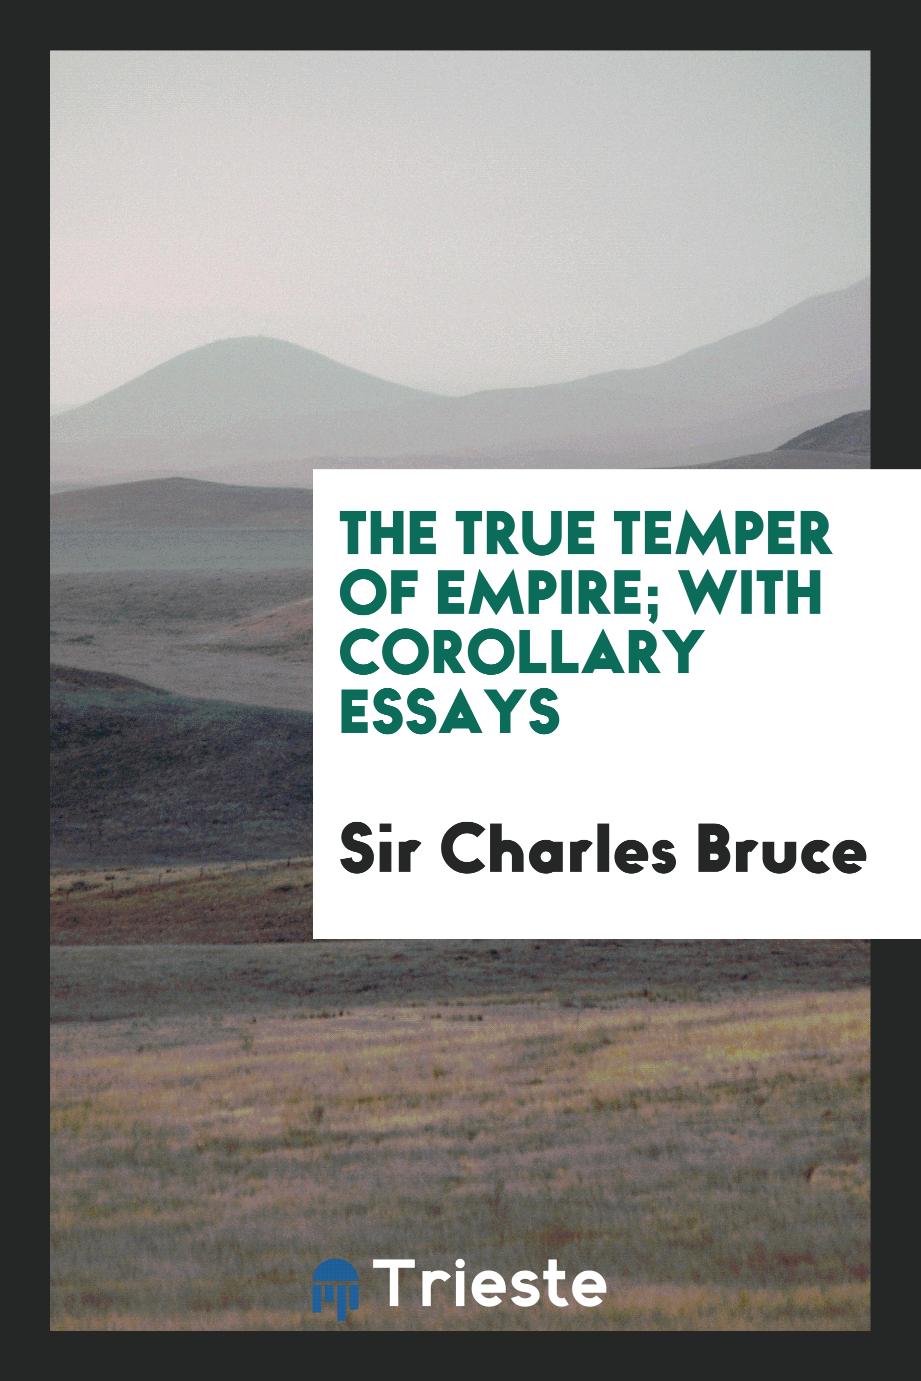 The true temper of empire; with corollary essays